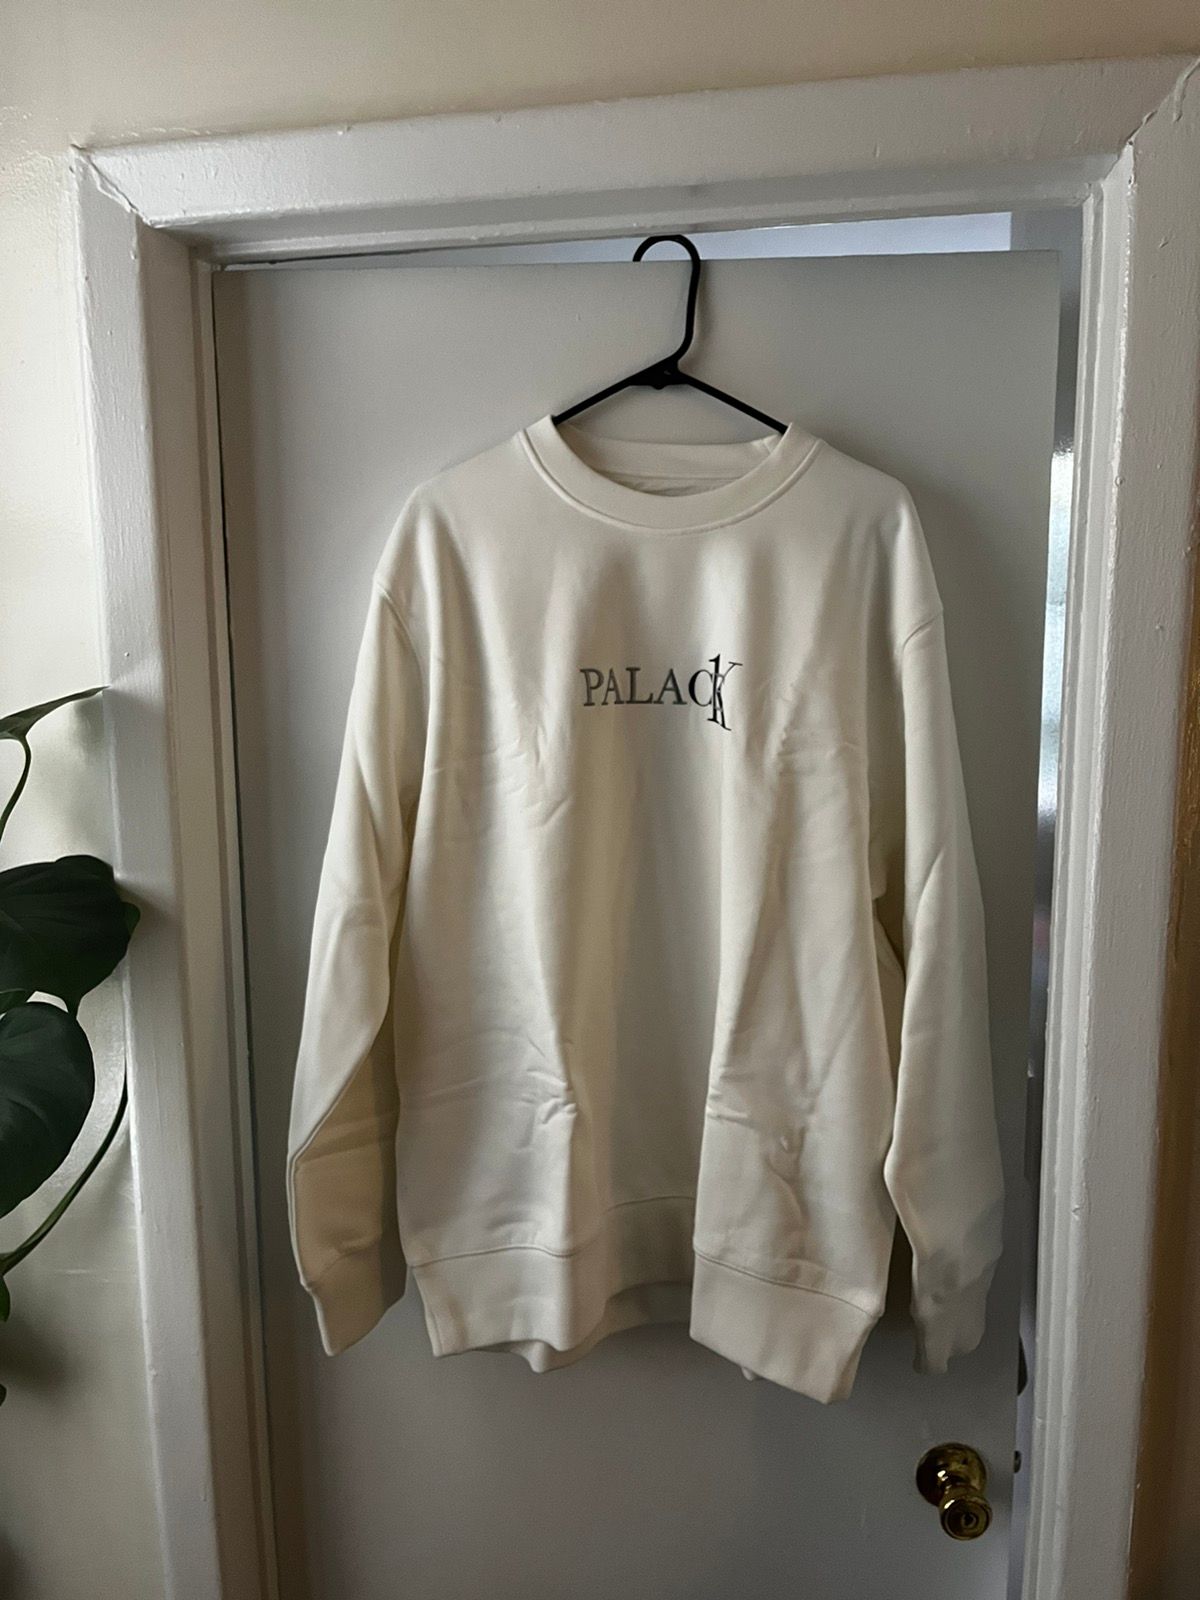 Calvin Klein “Ck1 Palace” White Crewneck in Null, Men's (Size 2XL) Product Image